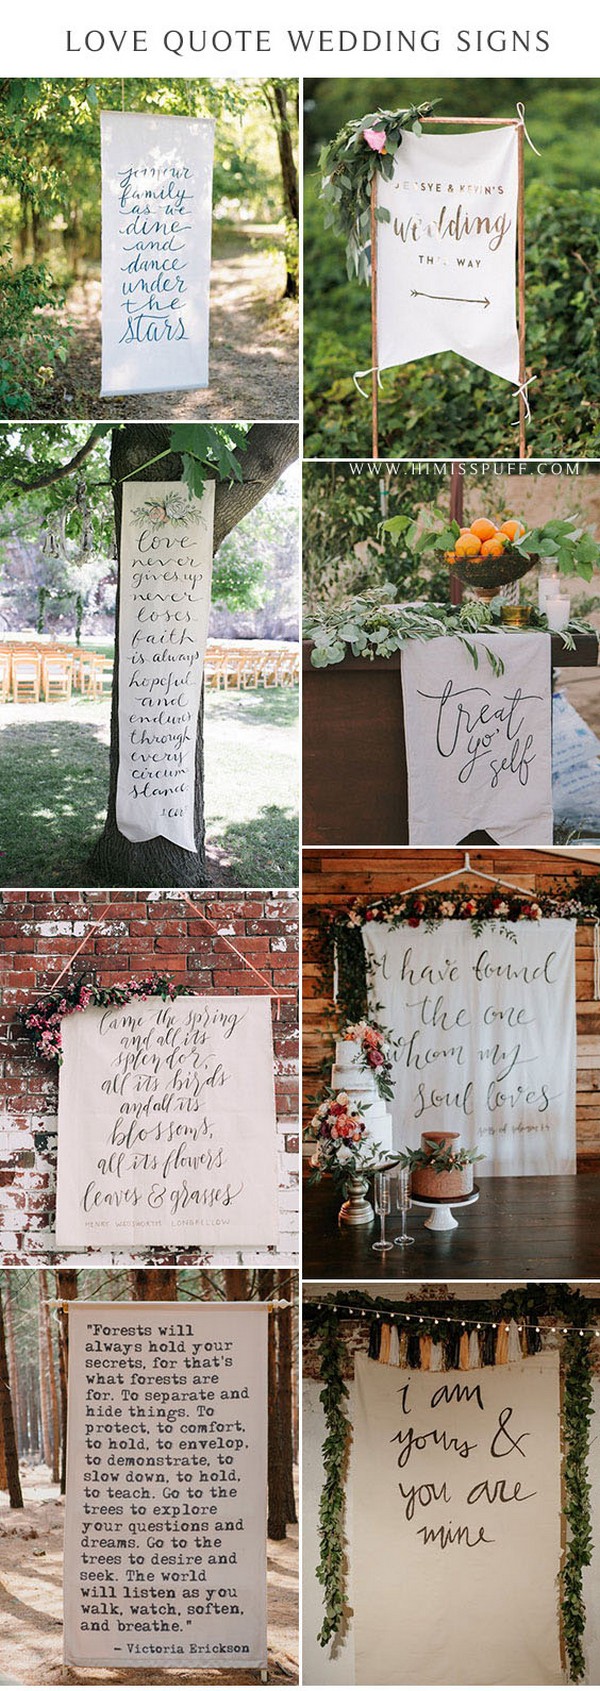 wedding Fabric Signs love quote sign Wedding Wall Best Day Ever wedding decor ideas